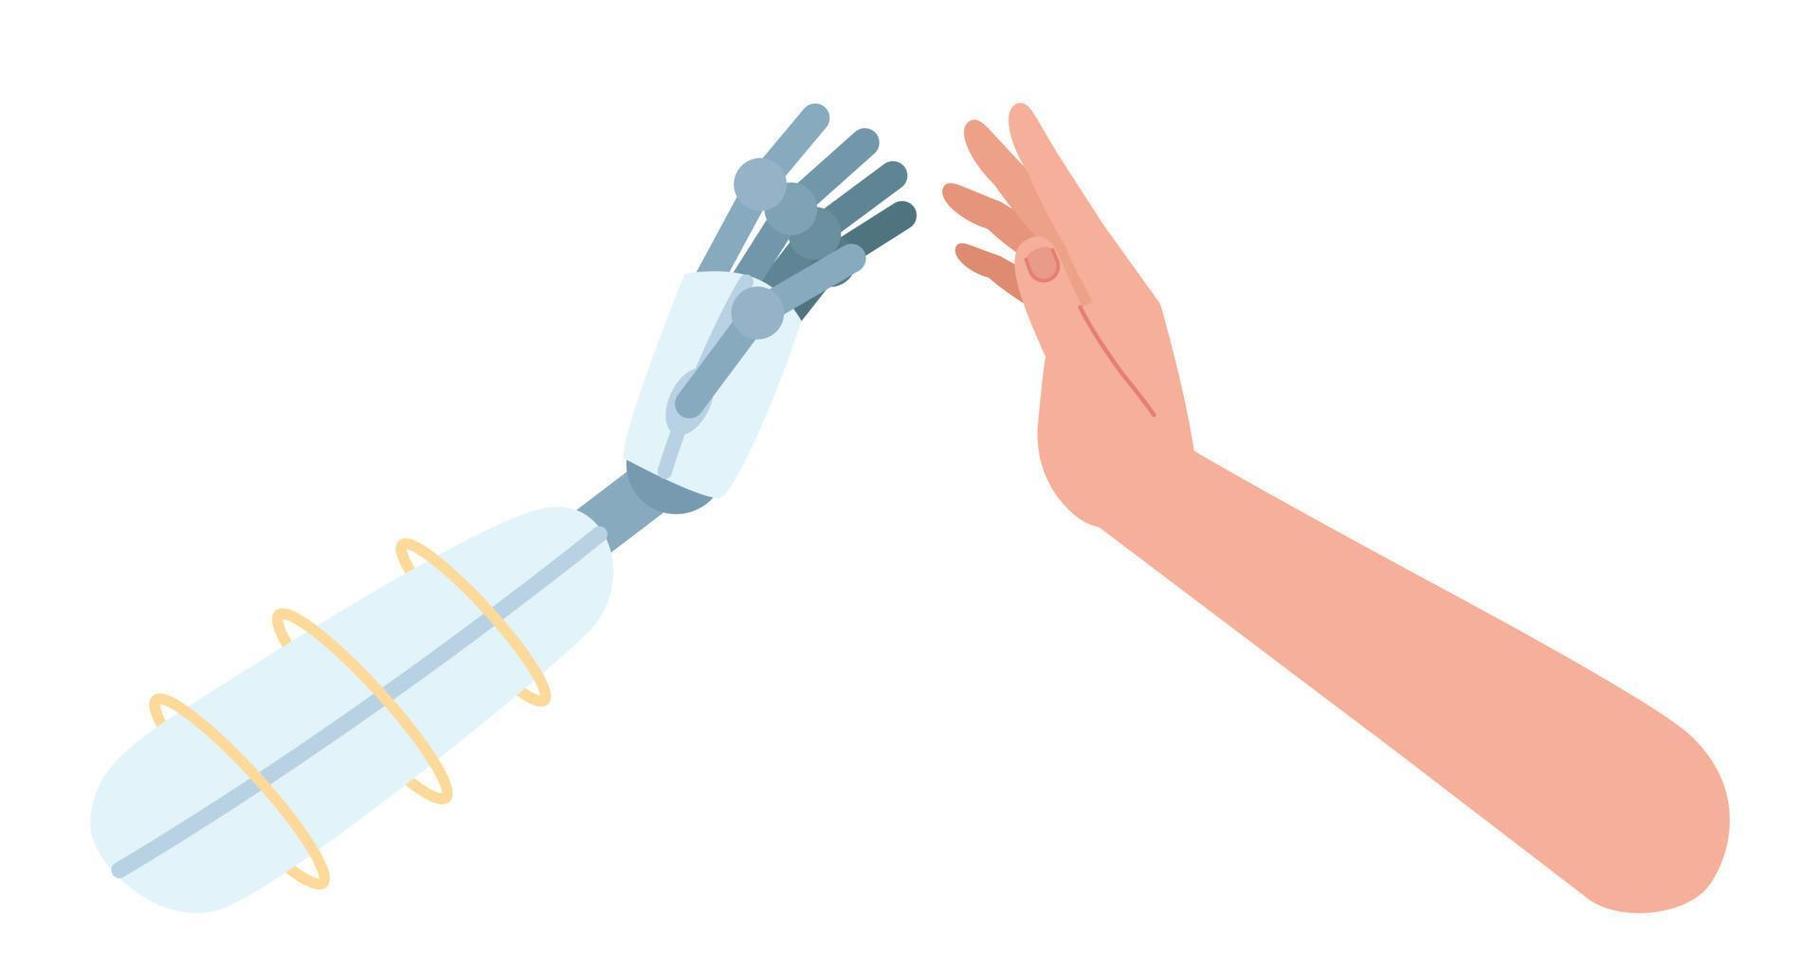 Robot and human clapping each other hands semi flat color vector characters. Collaboration. Editable body parts on white. Simple cartoon style spot illustration for web graphic design and animation